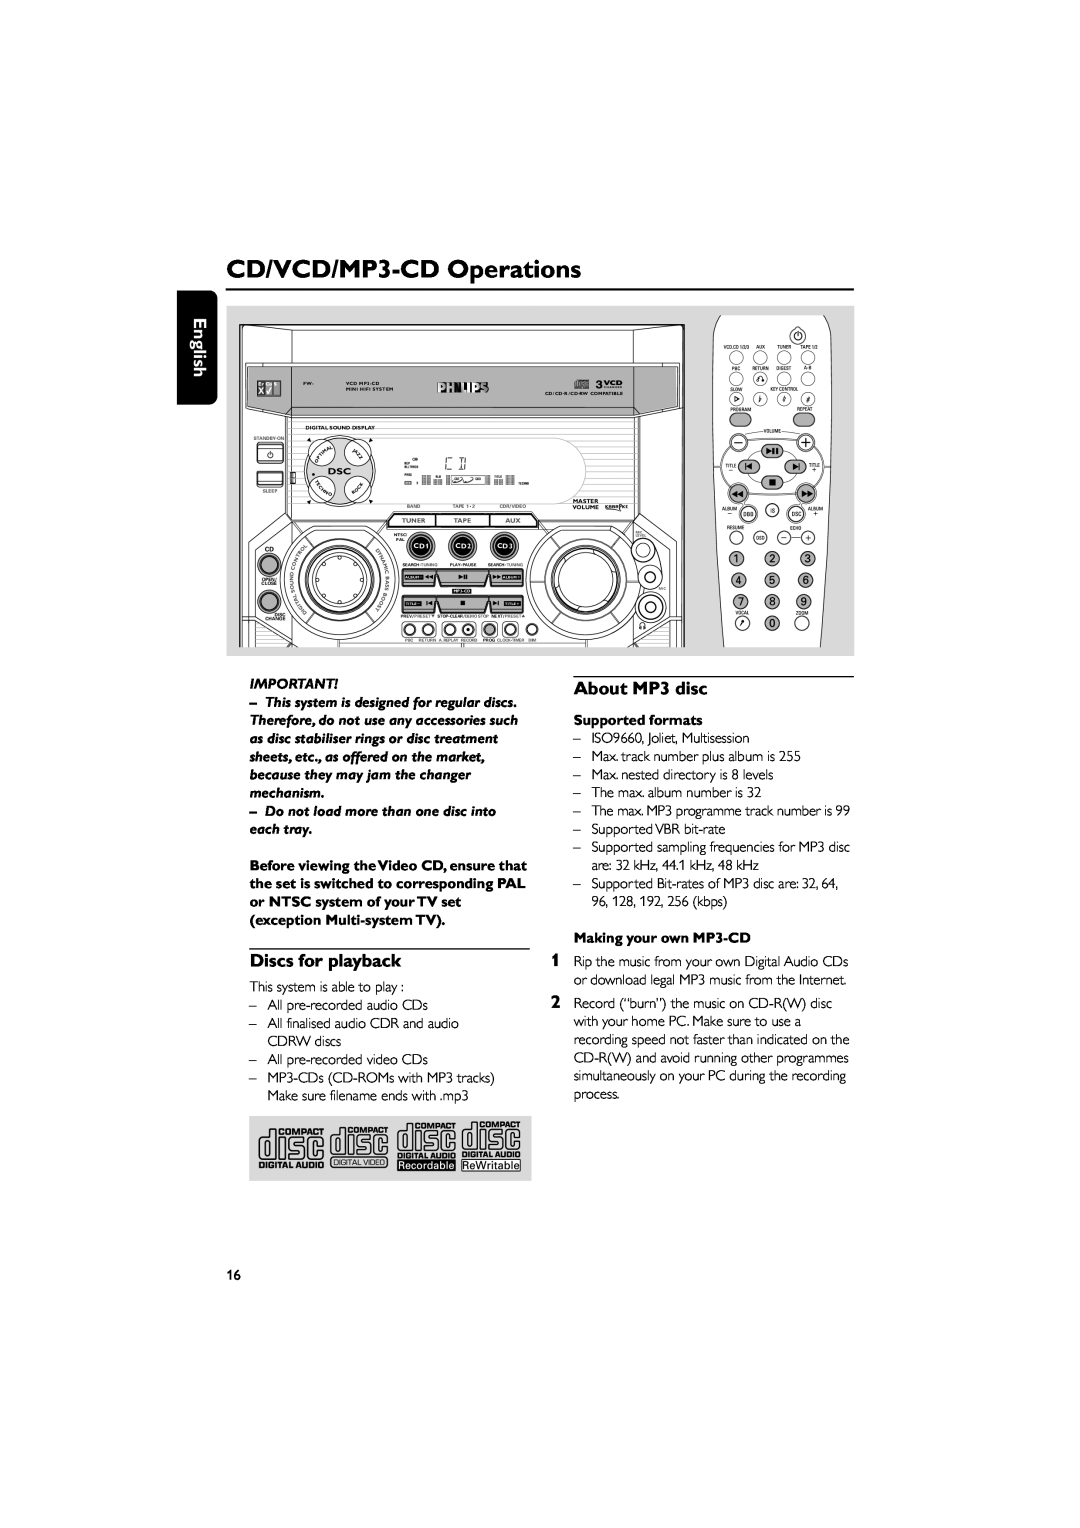 Philips FWV357/55 manual CD/VCD/MP3-CDOperations, About MP3 disc, English, Discs for playback 